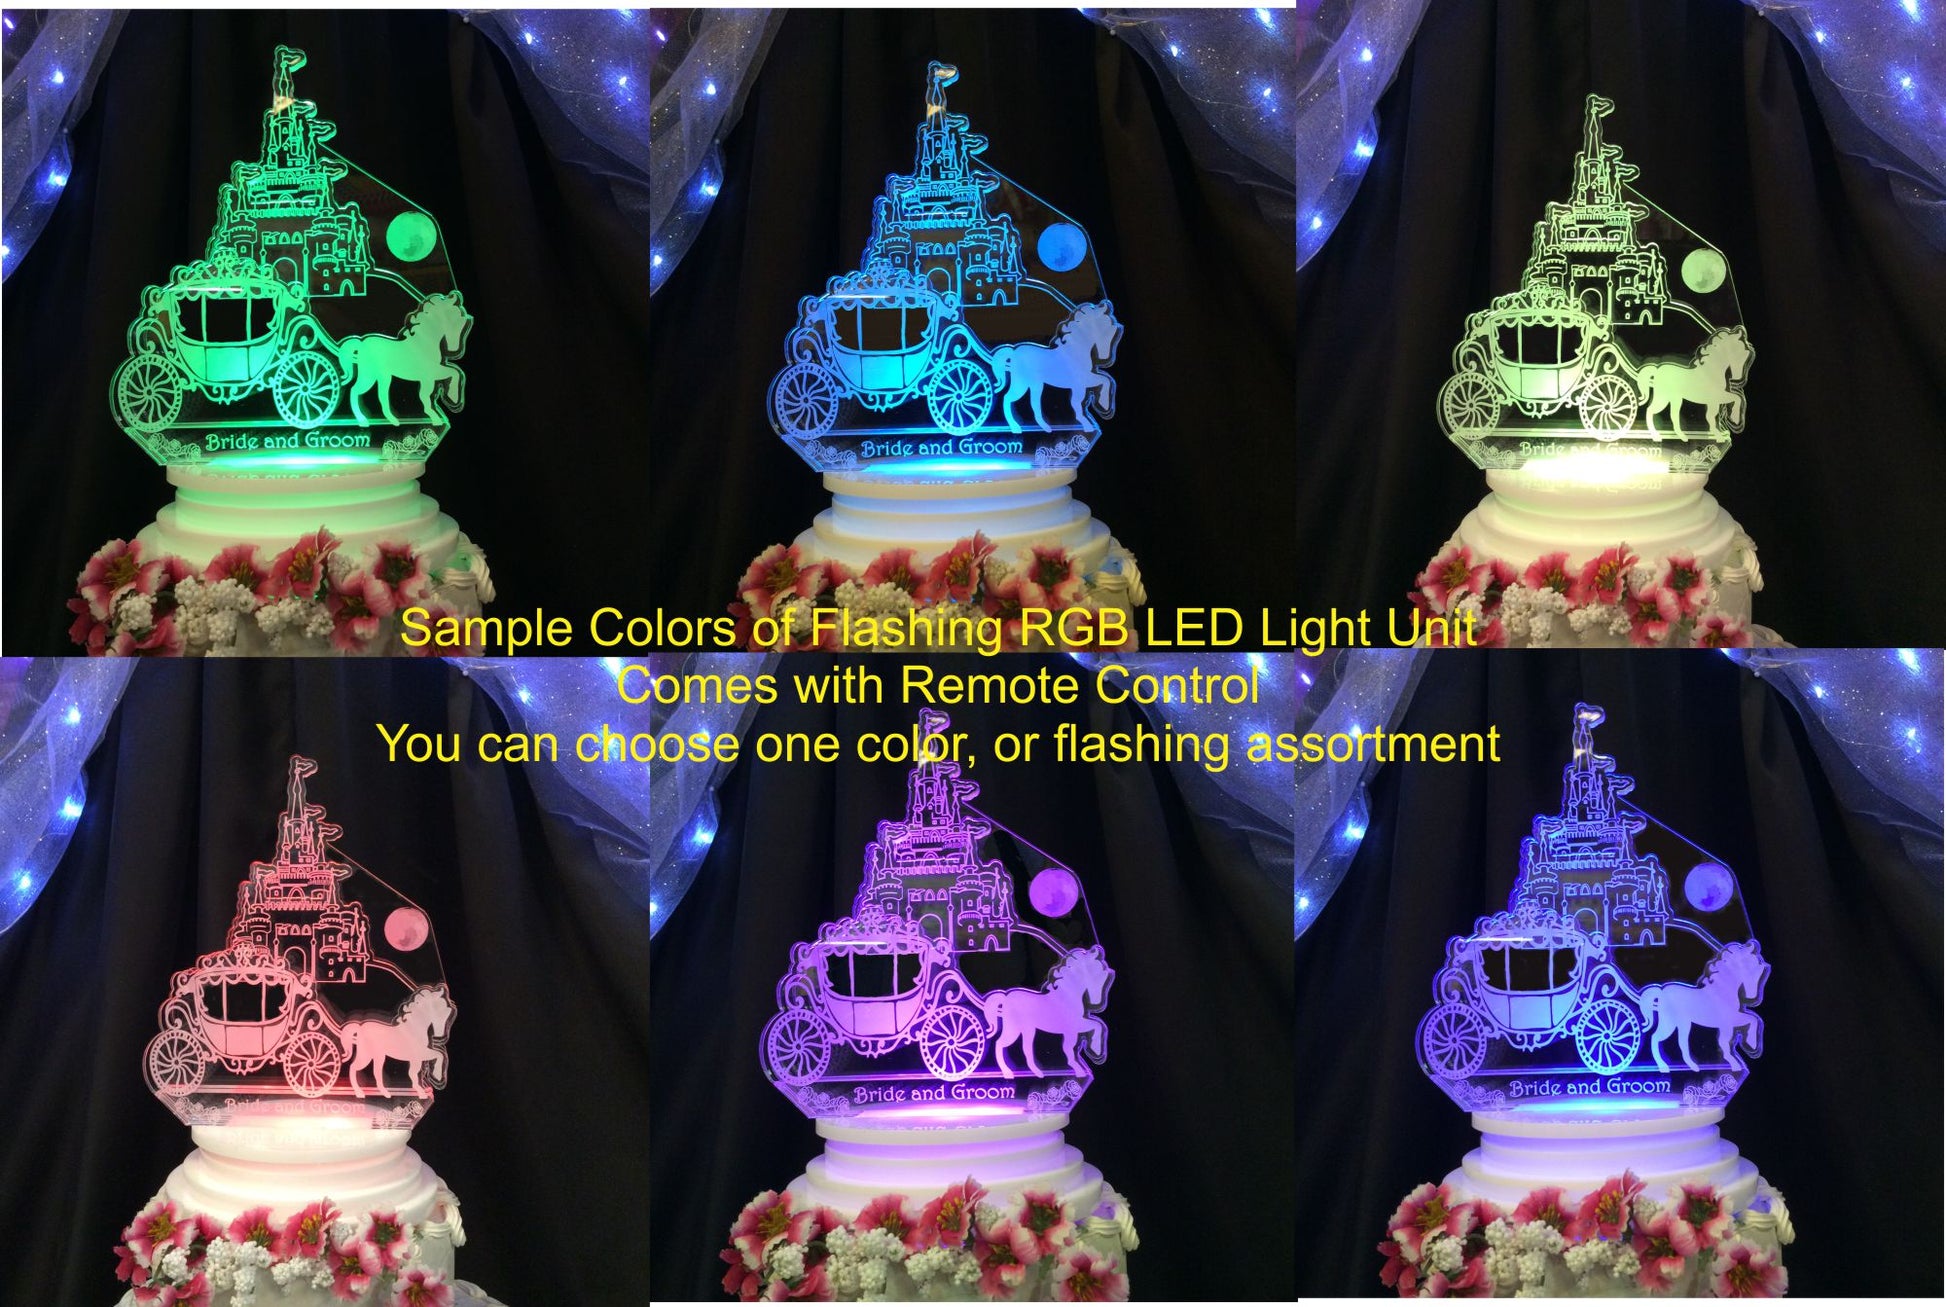 acrylic castle and carriage cake topper lit up with bride and groom name, shown in a variety of RGB colored LED lighting